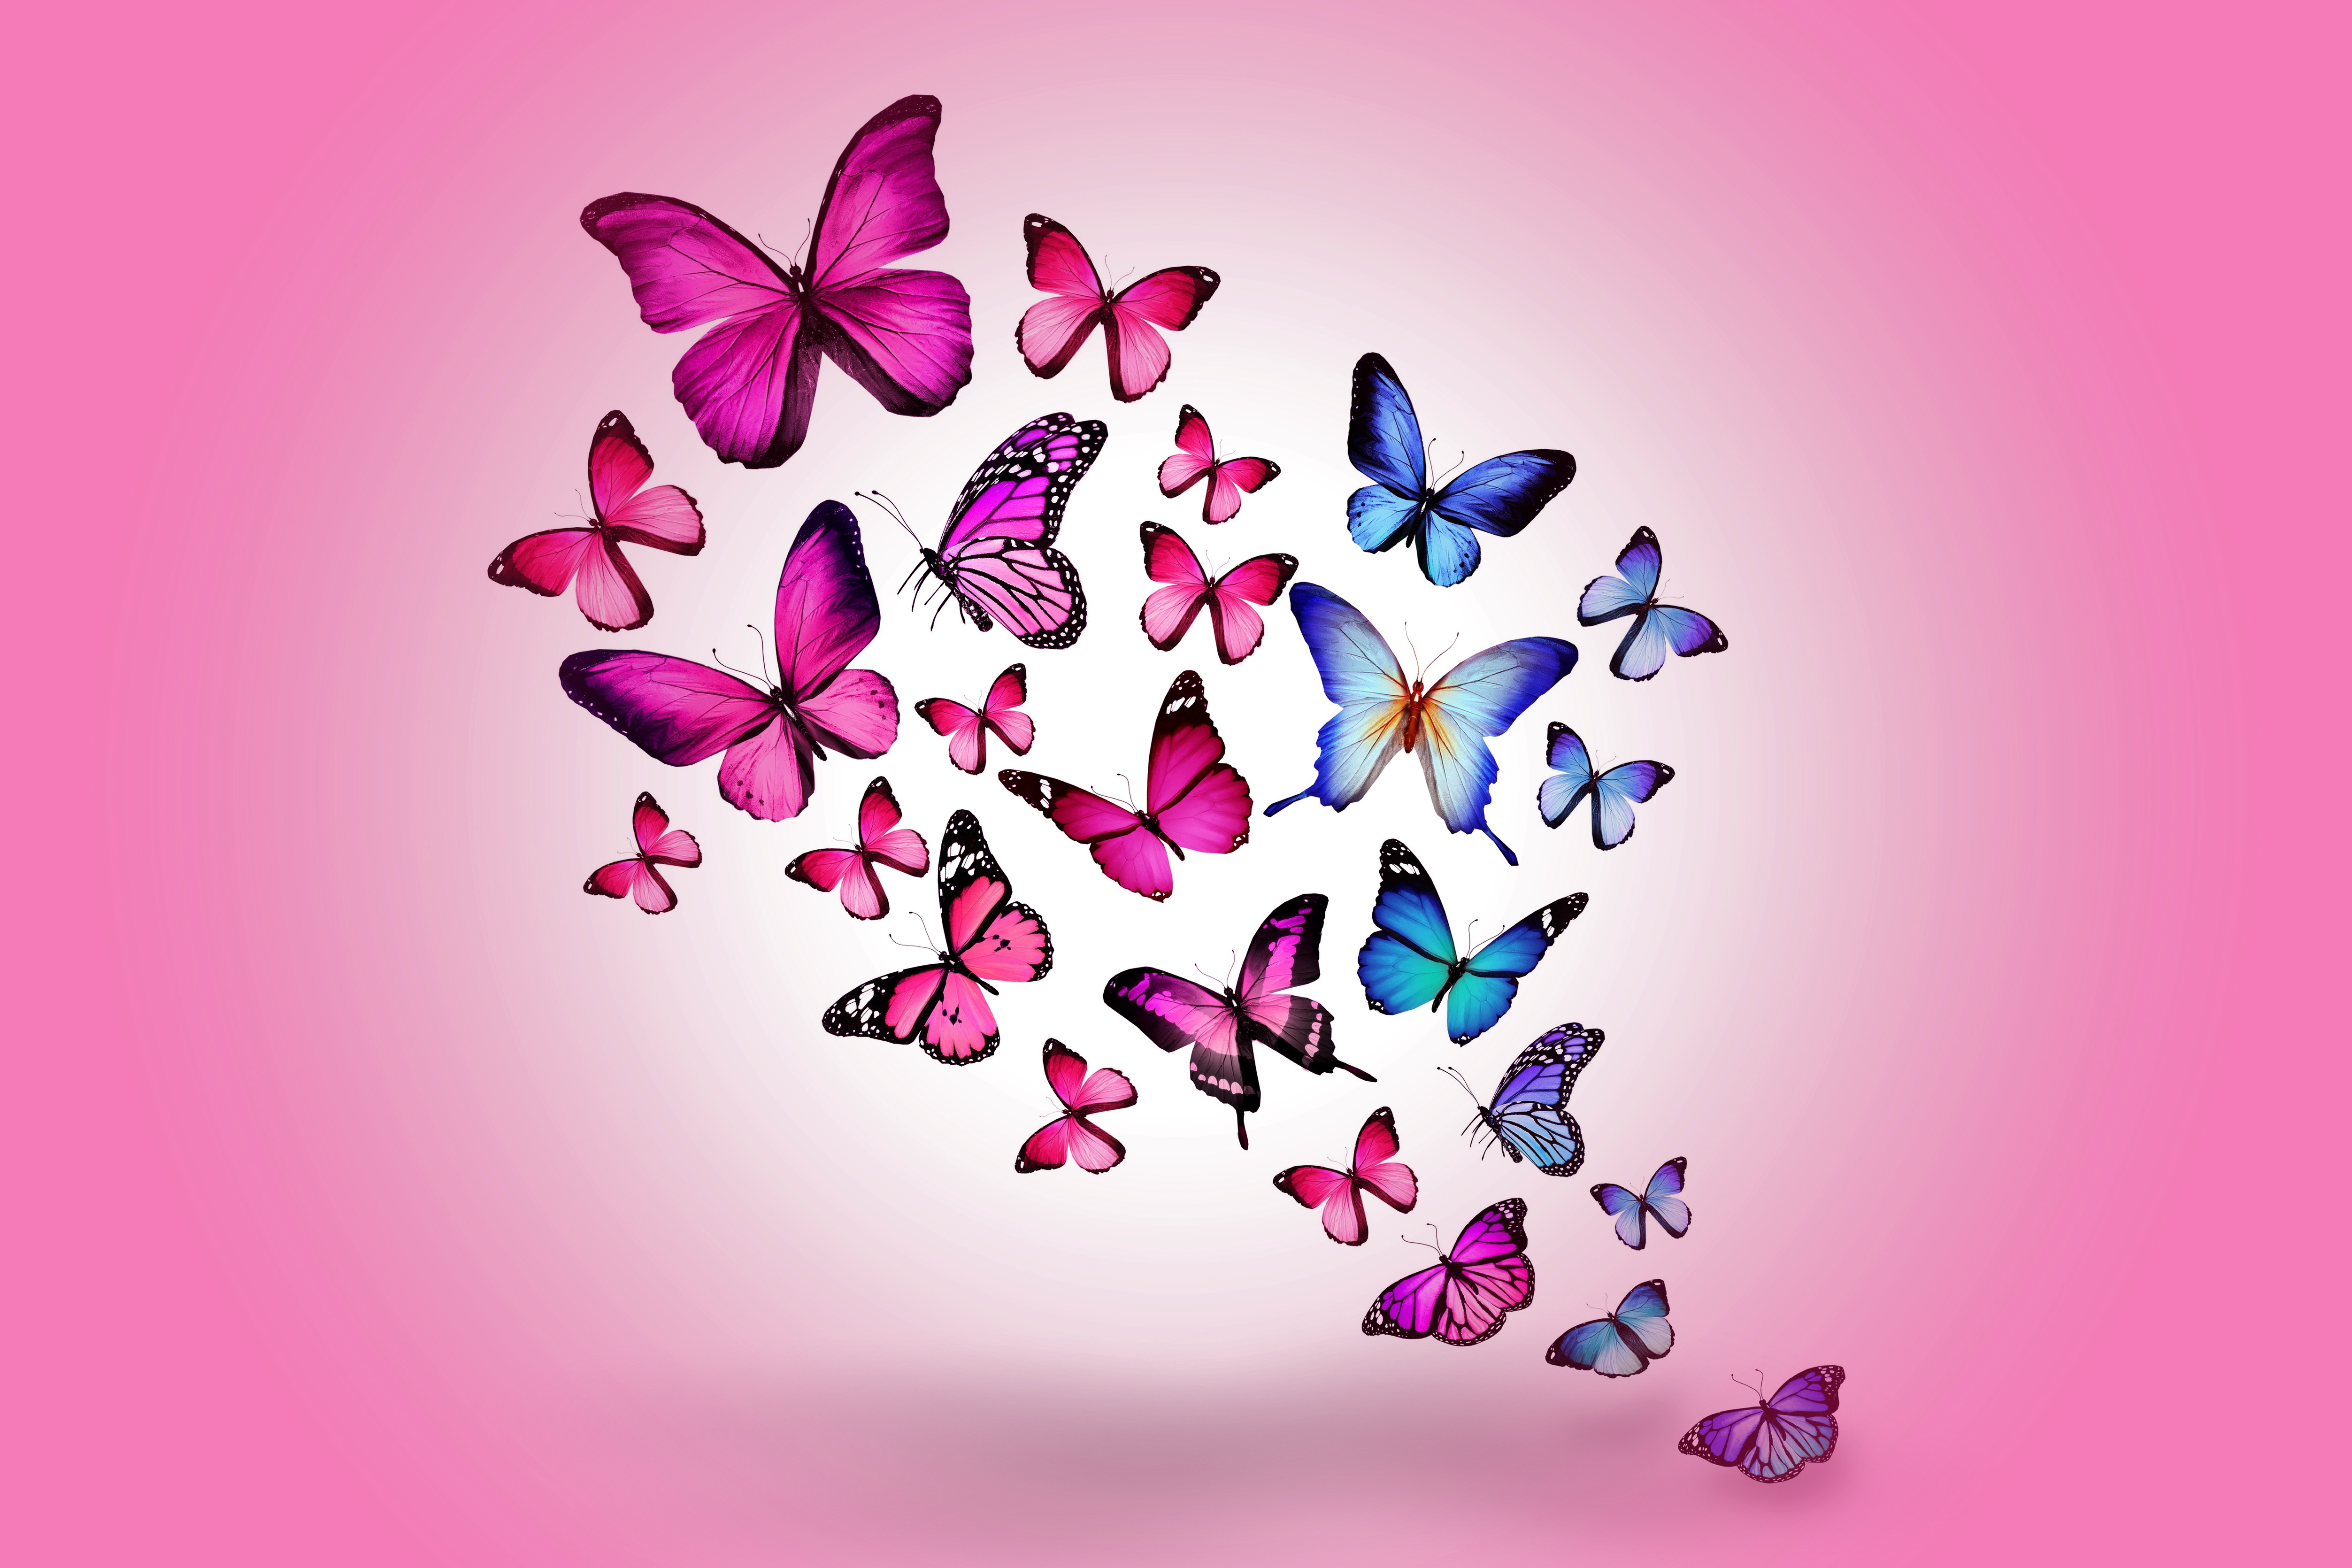 wallpapers background, butterflies, multicolored, drawing, pink, miscellanea, miscellaneous, picture, flight